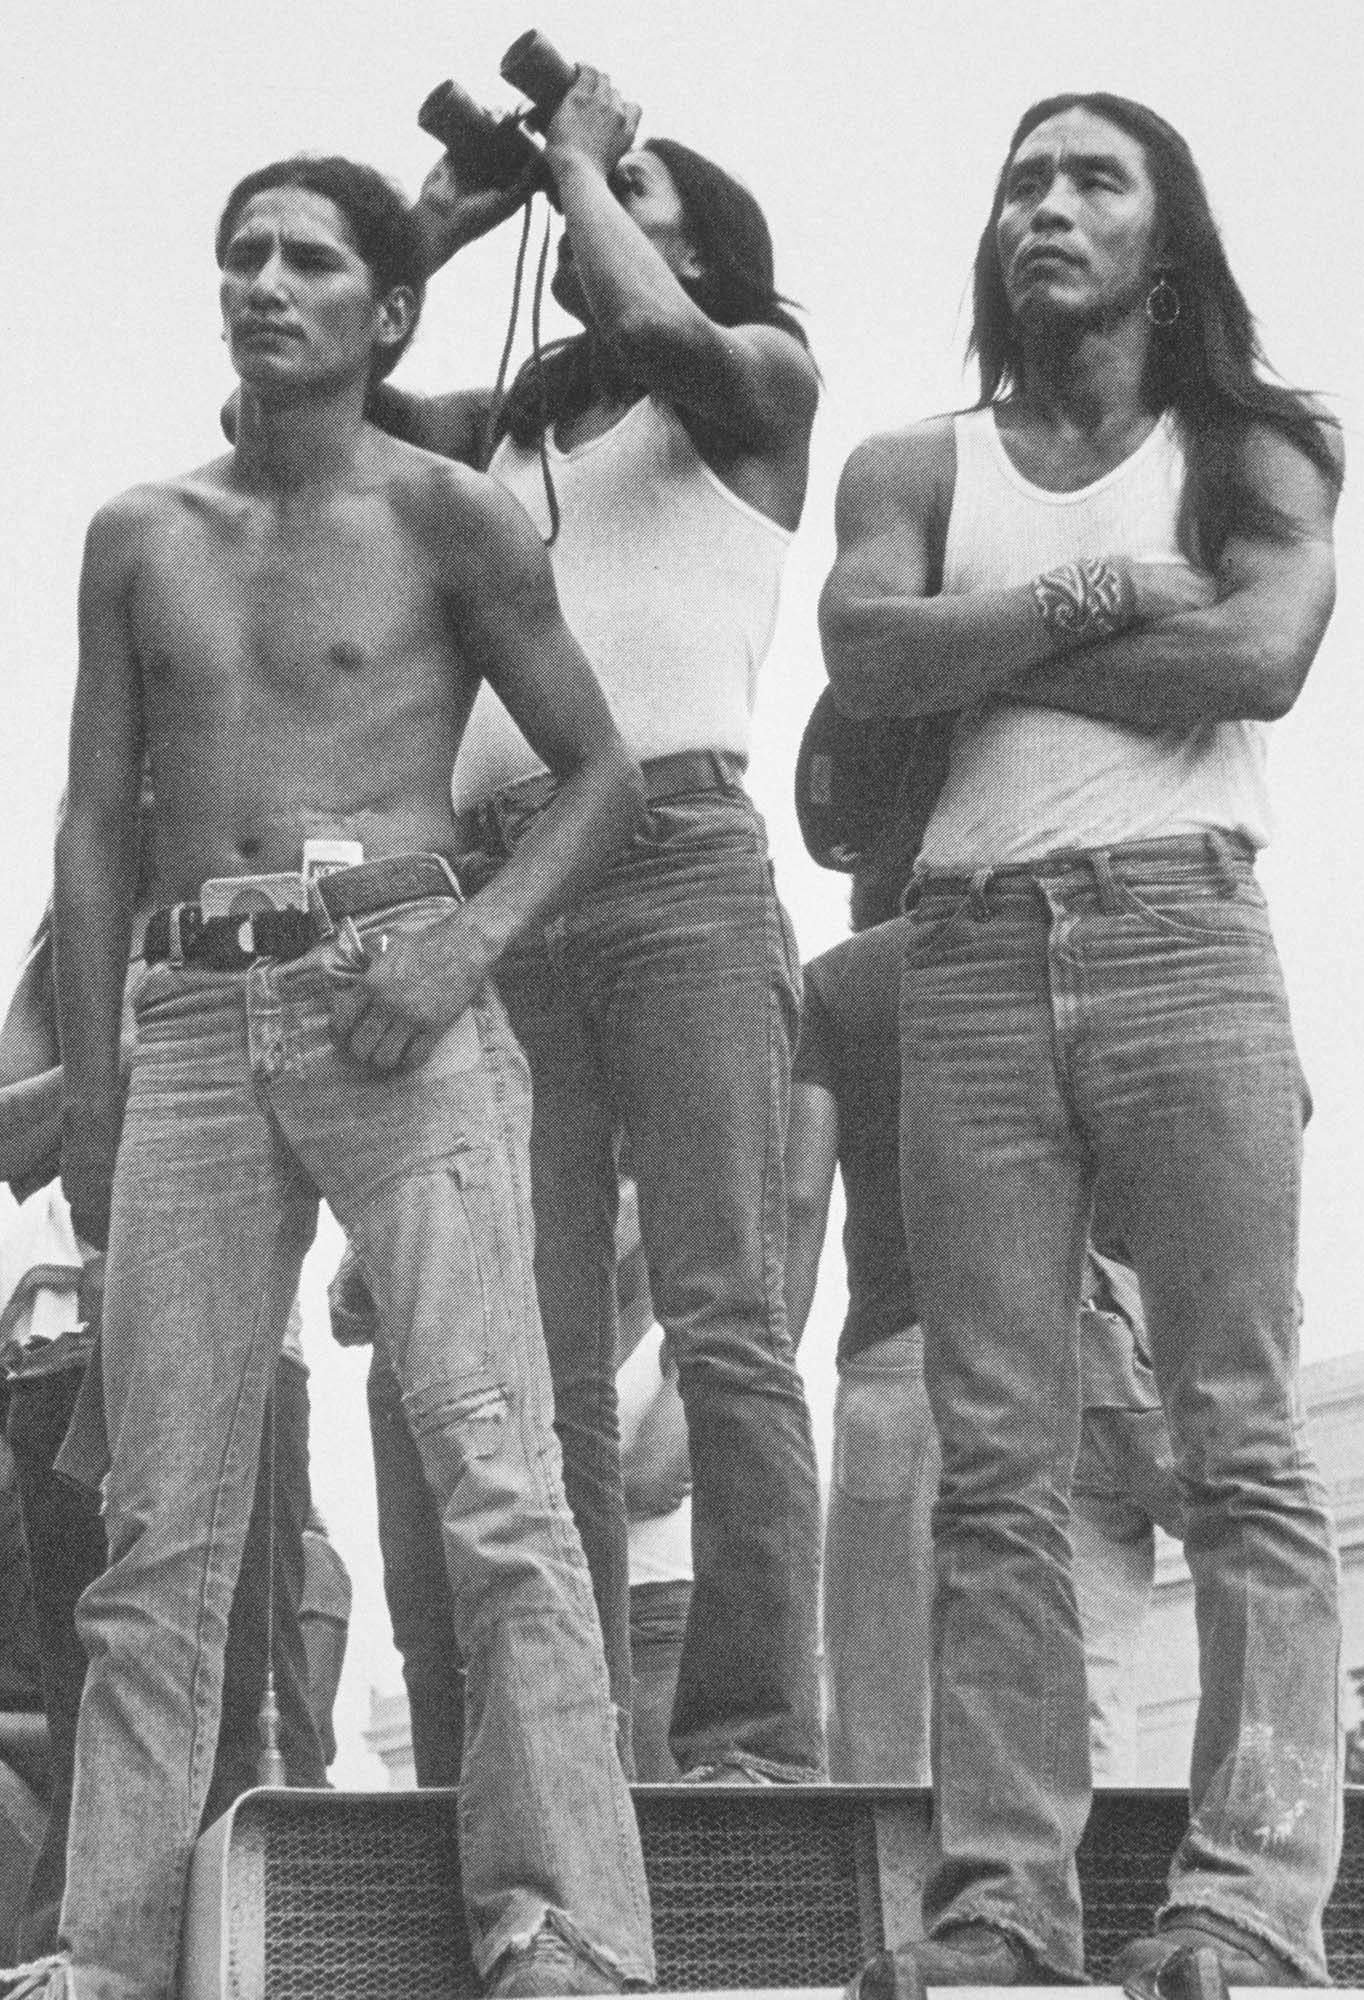 Stacy LaBlanc, John Blue Bird and Tom LaBlanc in front of the FBI building in Washington, D.C., in 1978 during the Longest Walk, a cross-country protest march.